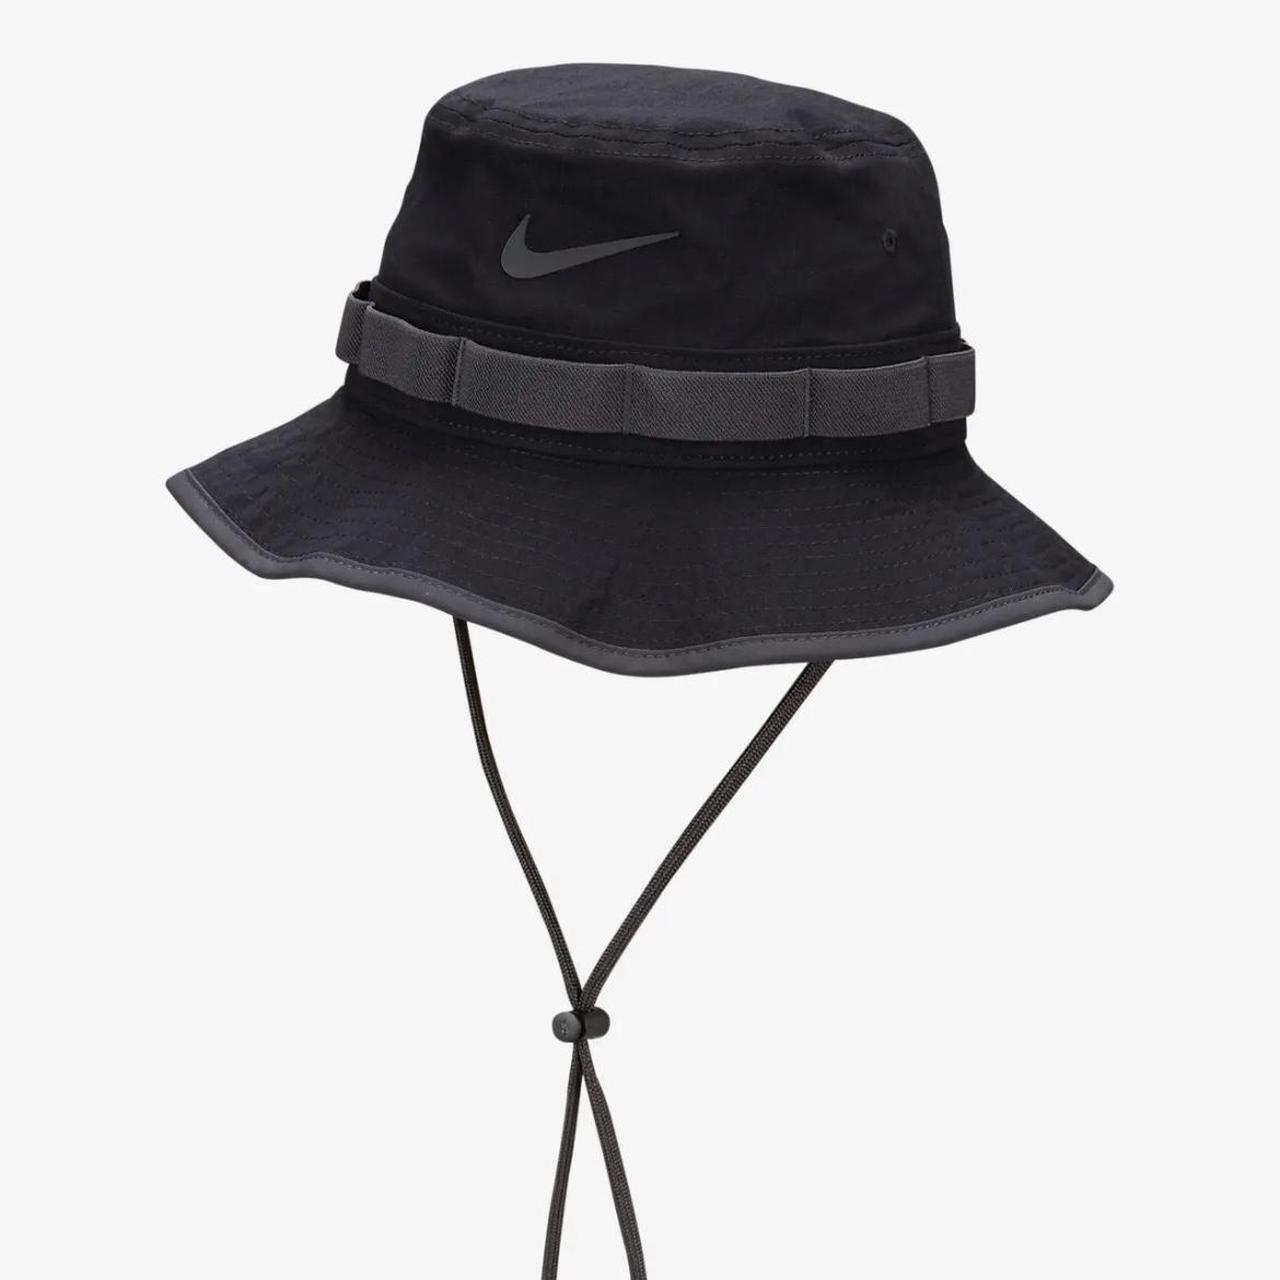 Nike Dri-FIT Apex Bucket Hat Sold out on all... - Depop